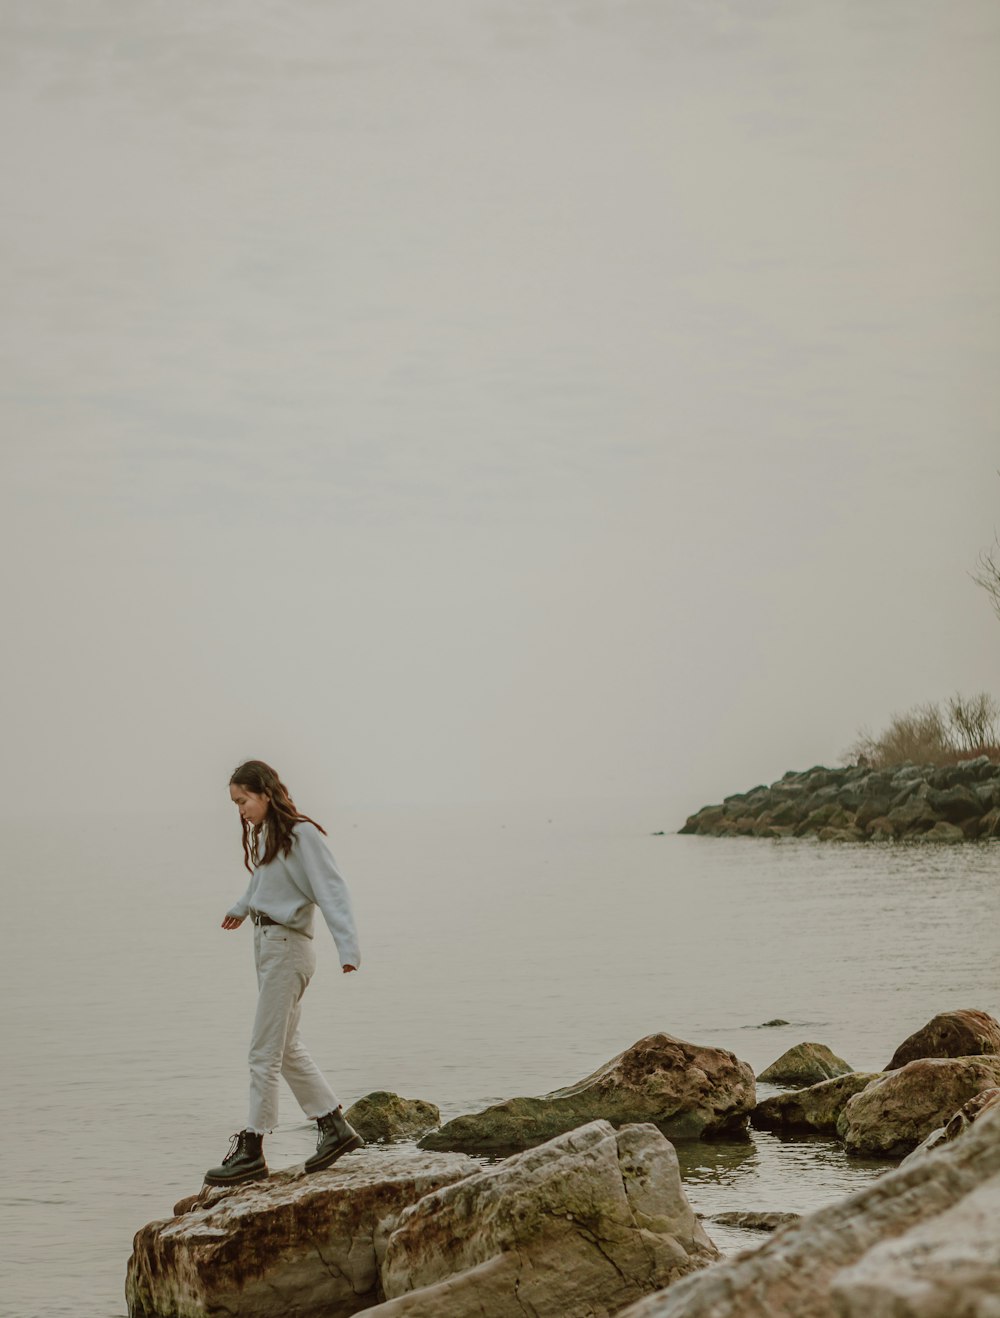 woman in white jacket standing on rock near body of water during daytime